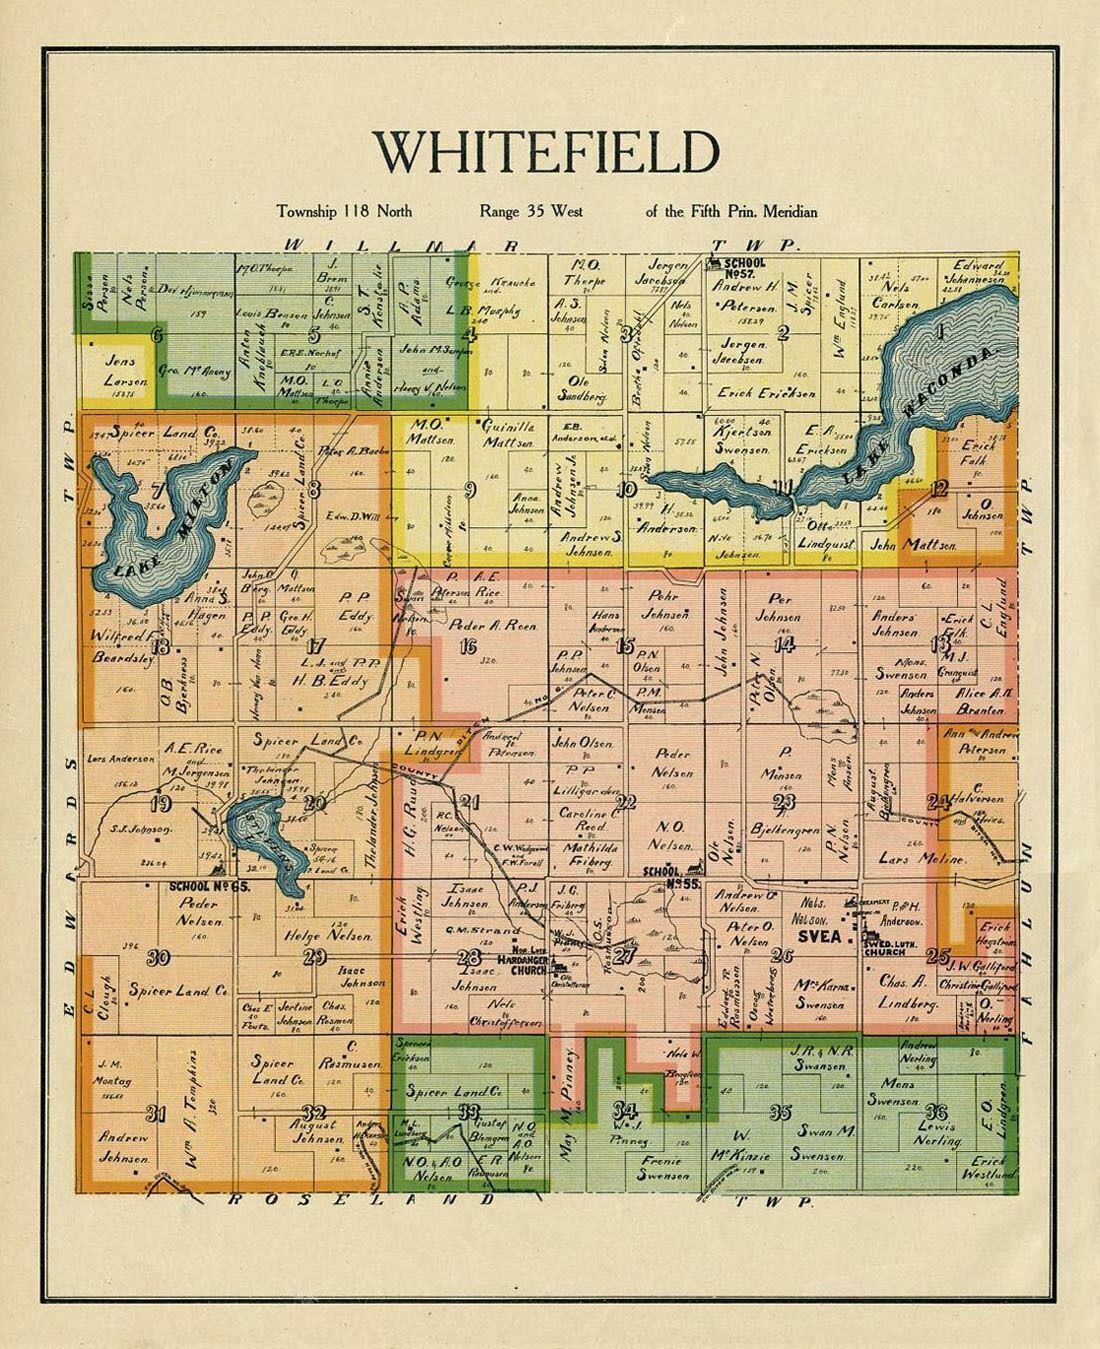 Whitefield Township Rare Antique 1905 Map Kandiyohi County Minnesota G Archives Of History Llc 5289